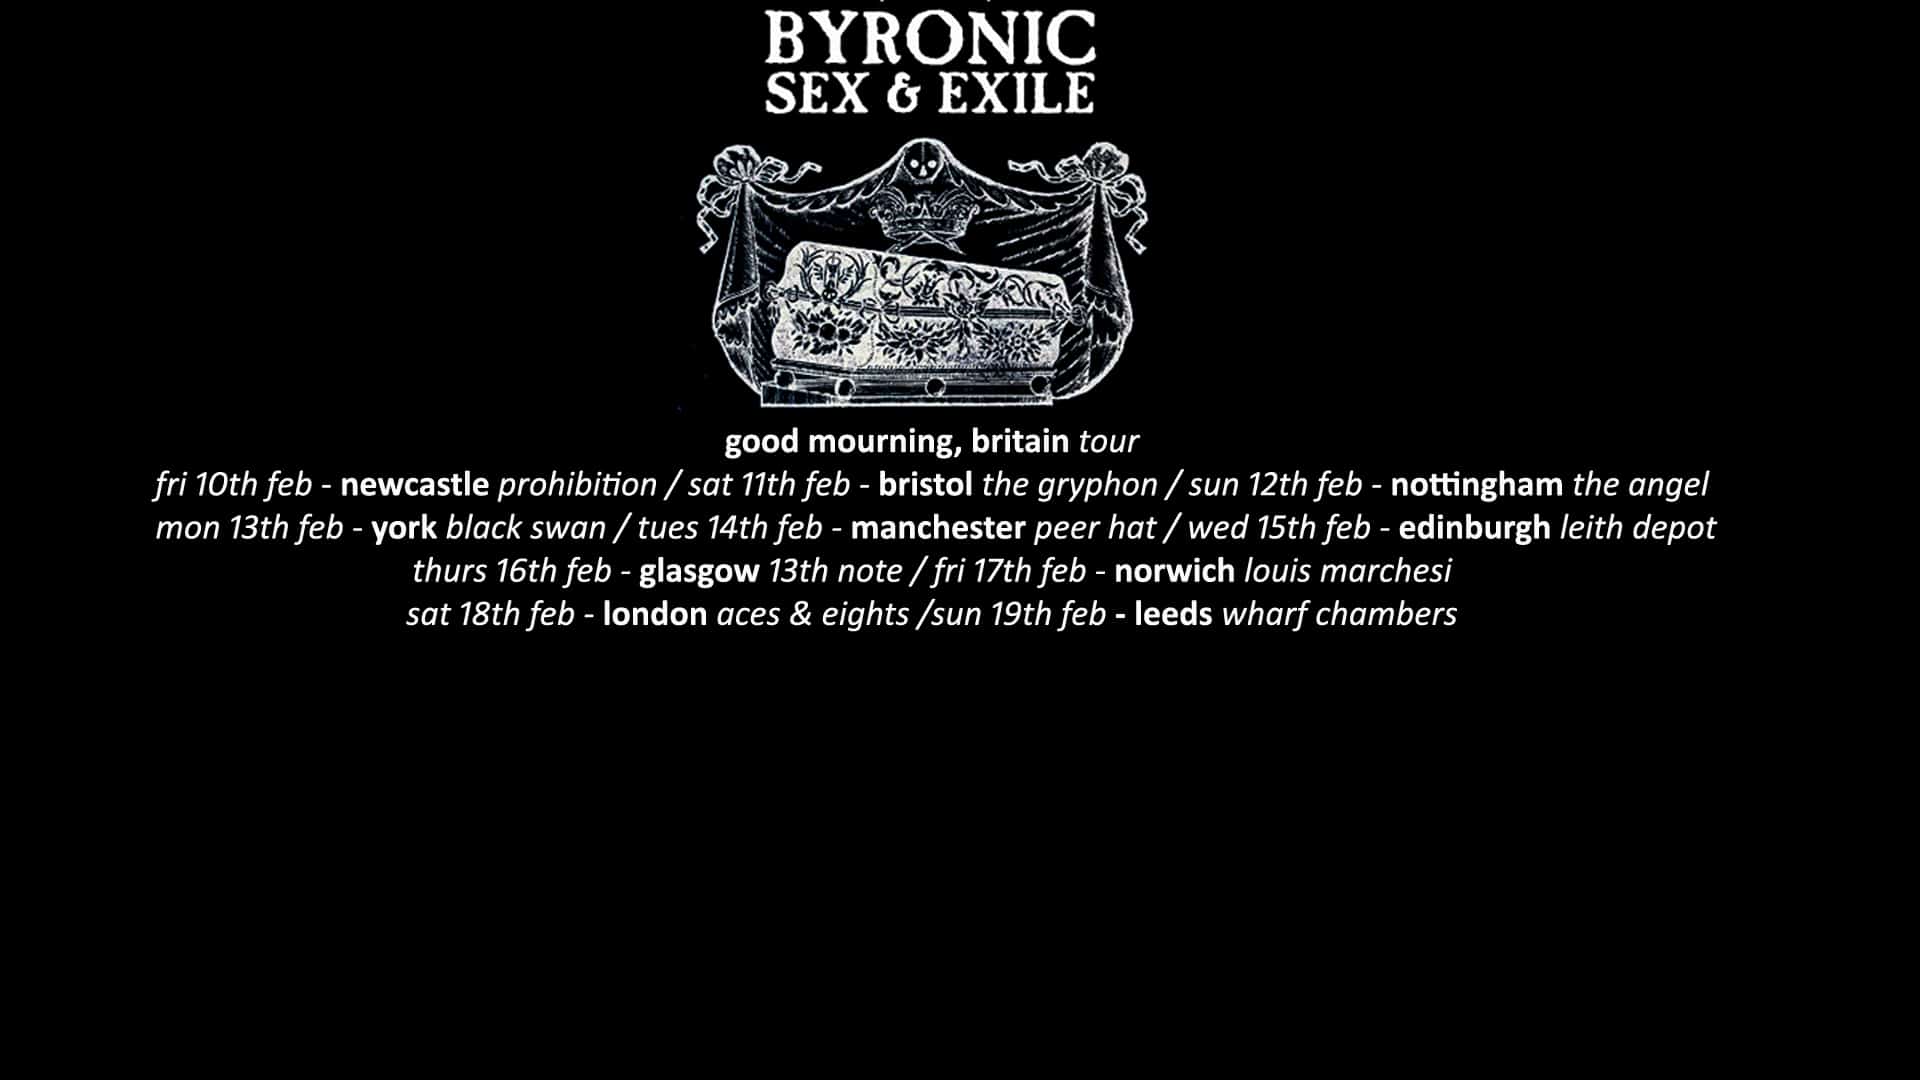 Byronic Sex & Exile - 'Good Mourning' UK tour + Special guests Last July